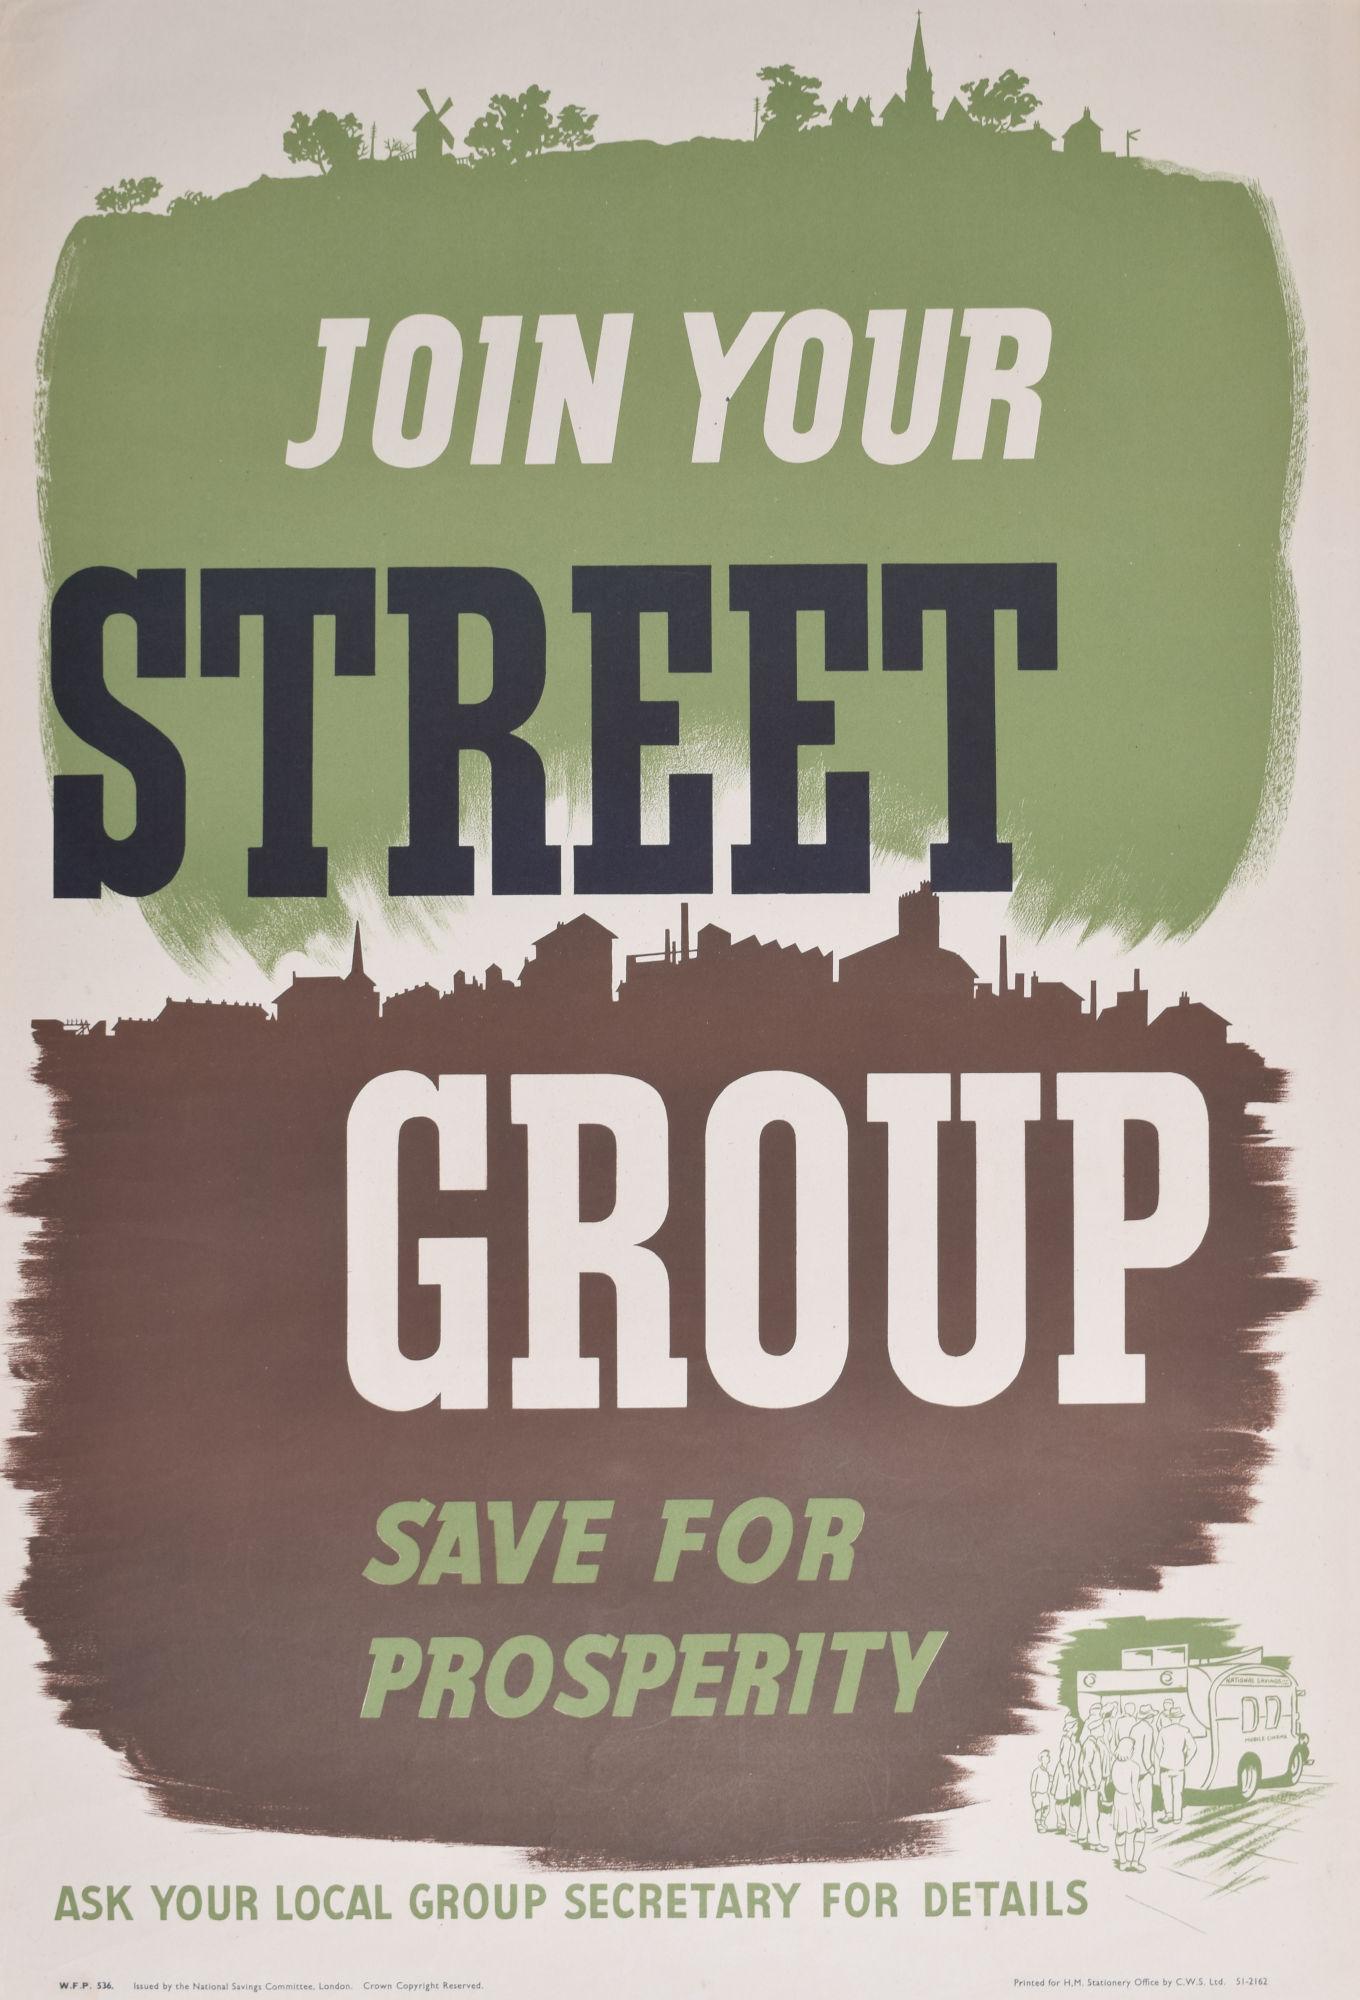 Join Your Street Group - Save for Prosperity original vintage poster - Print by Unknown